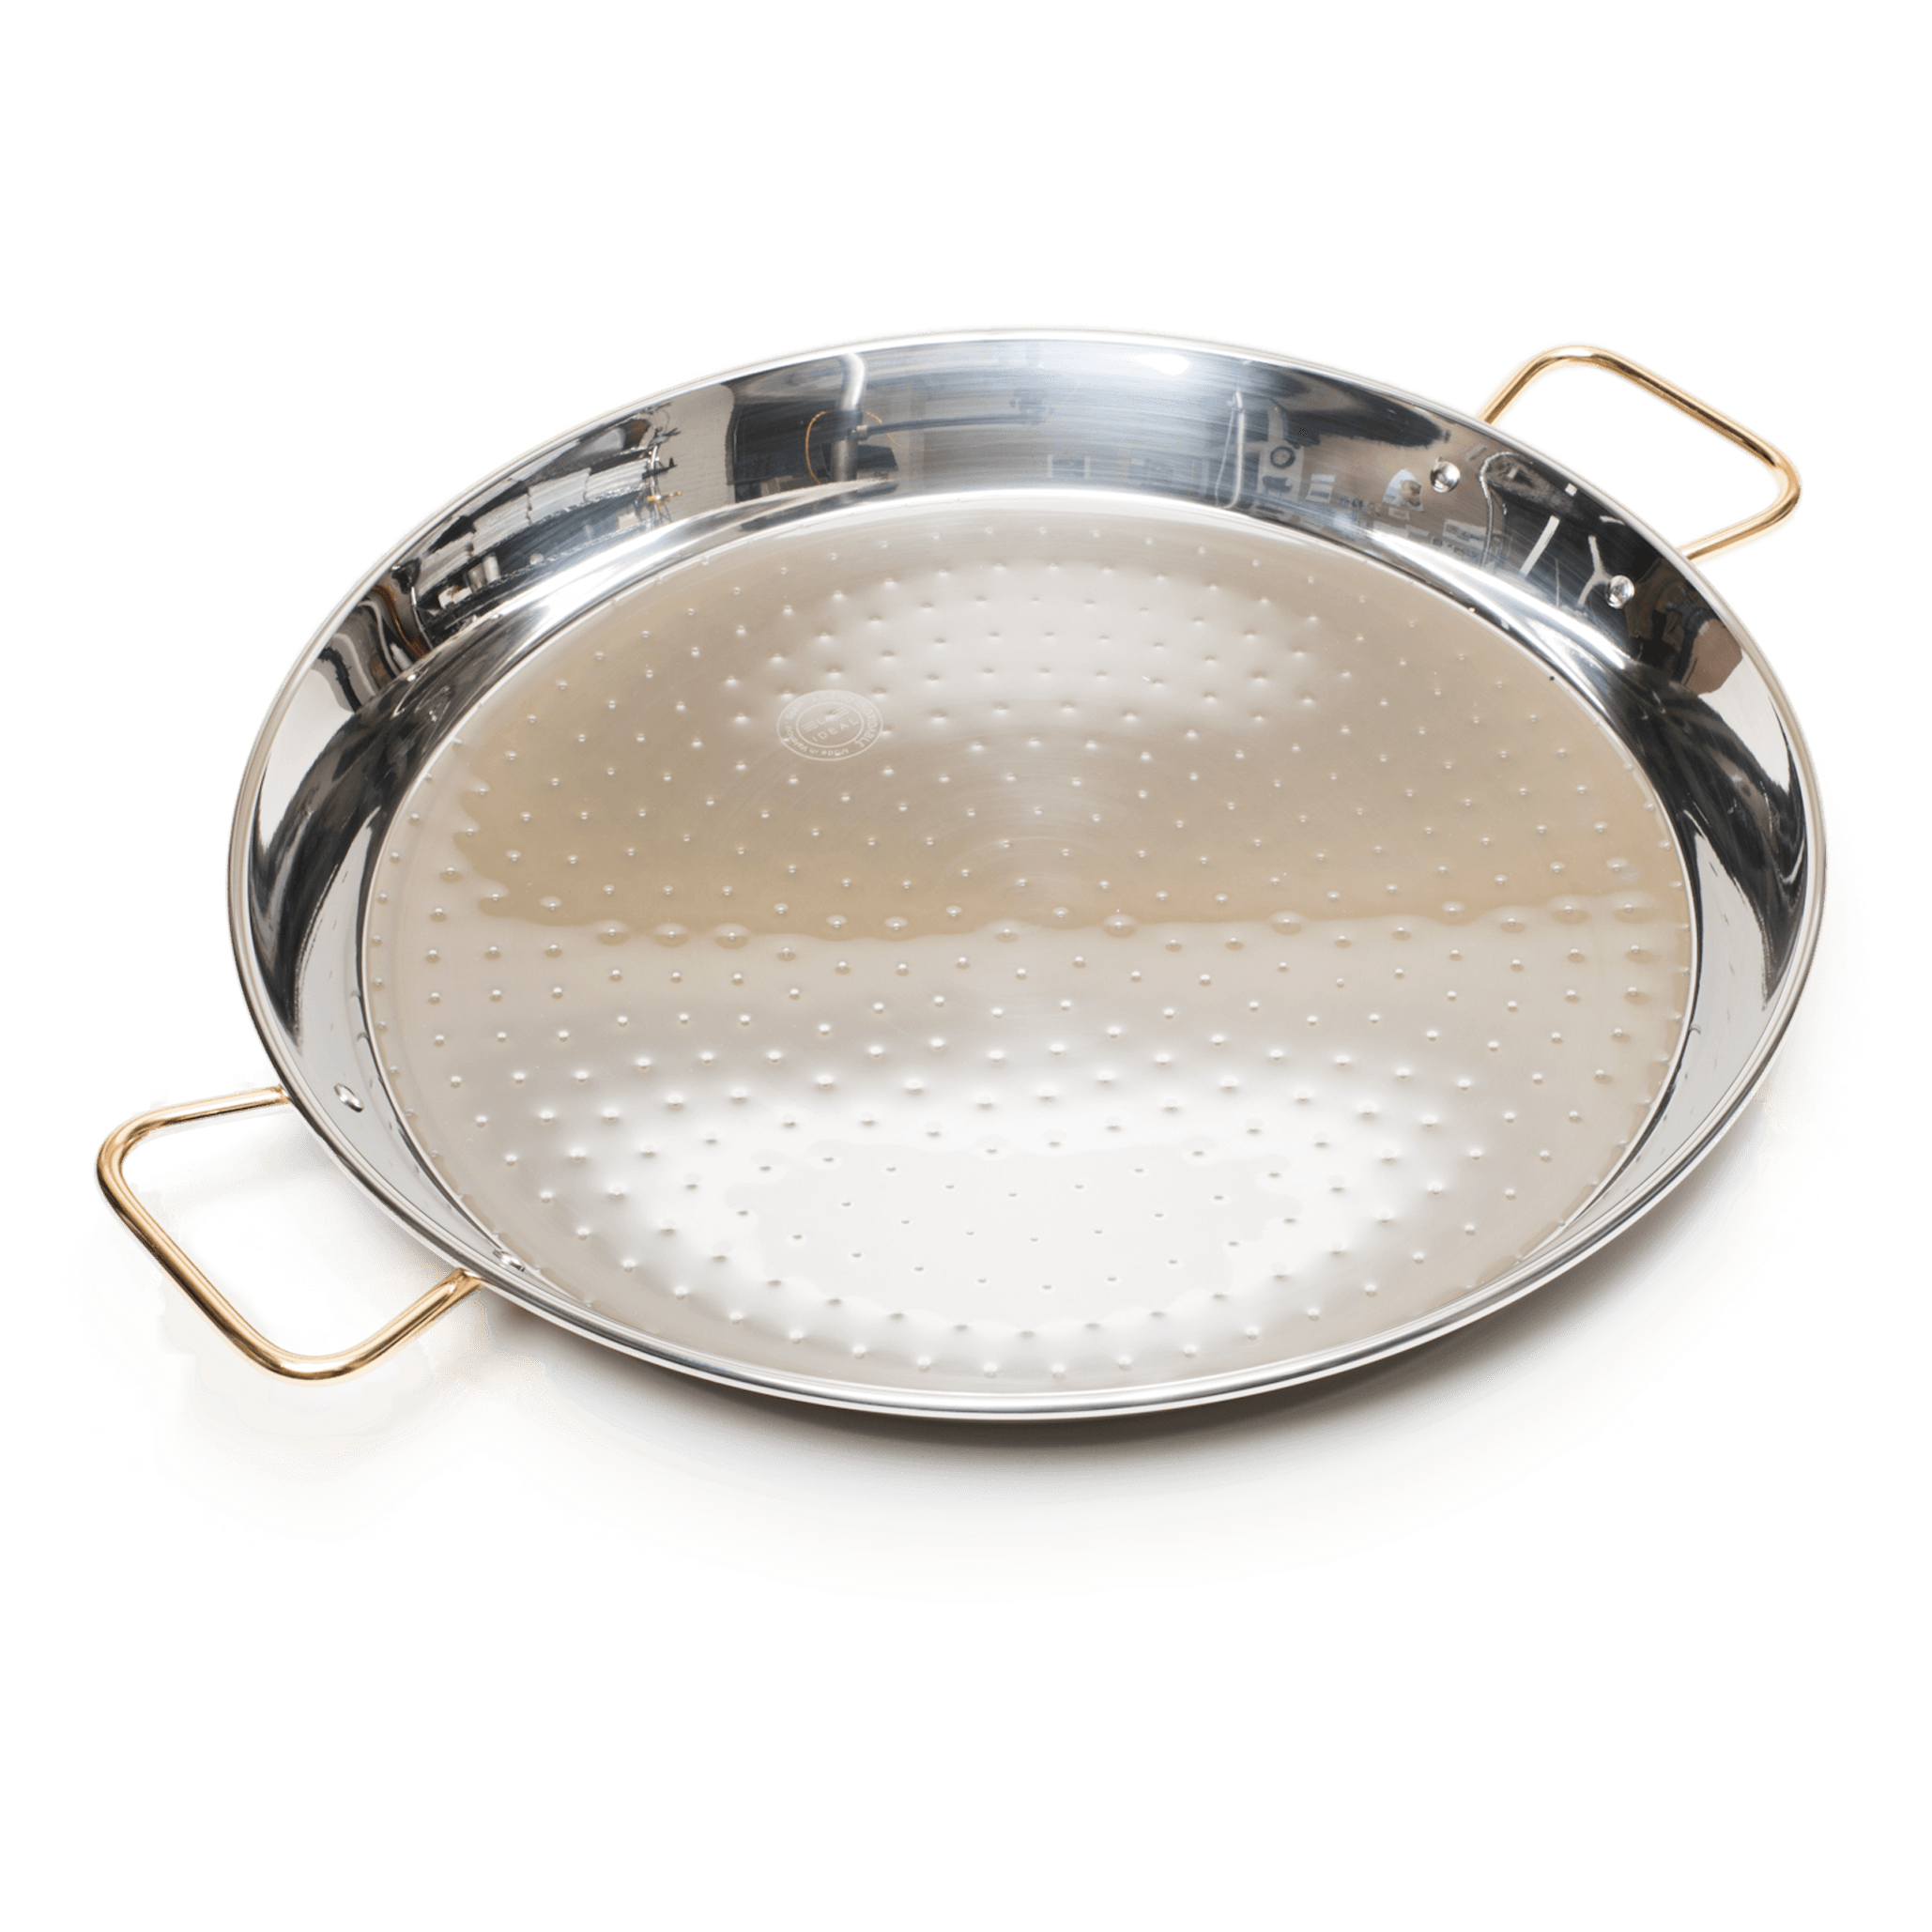 40cm Stainless Steel Induction Paella Pan for 9 ppl Paella induction